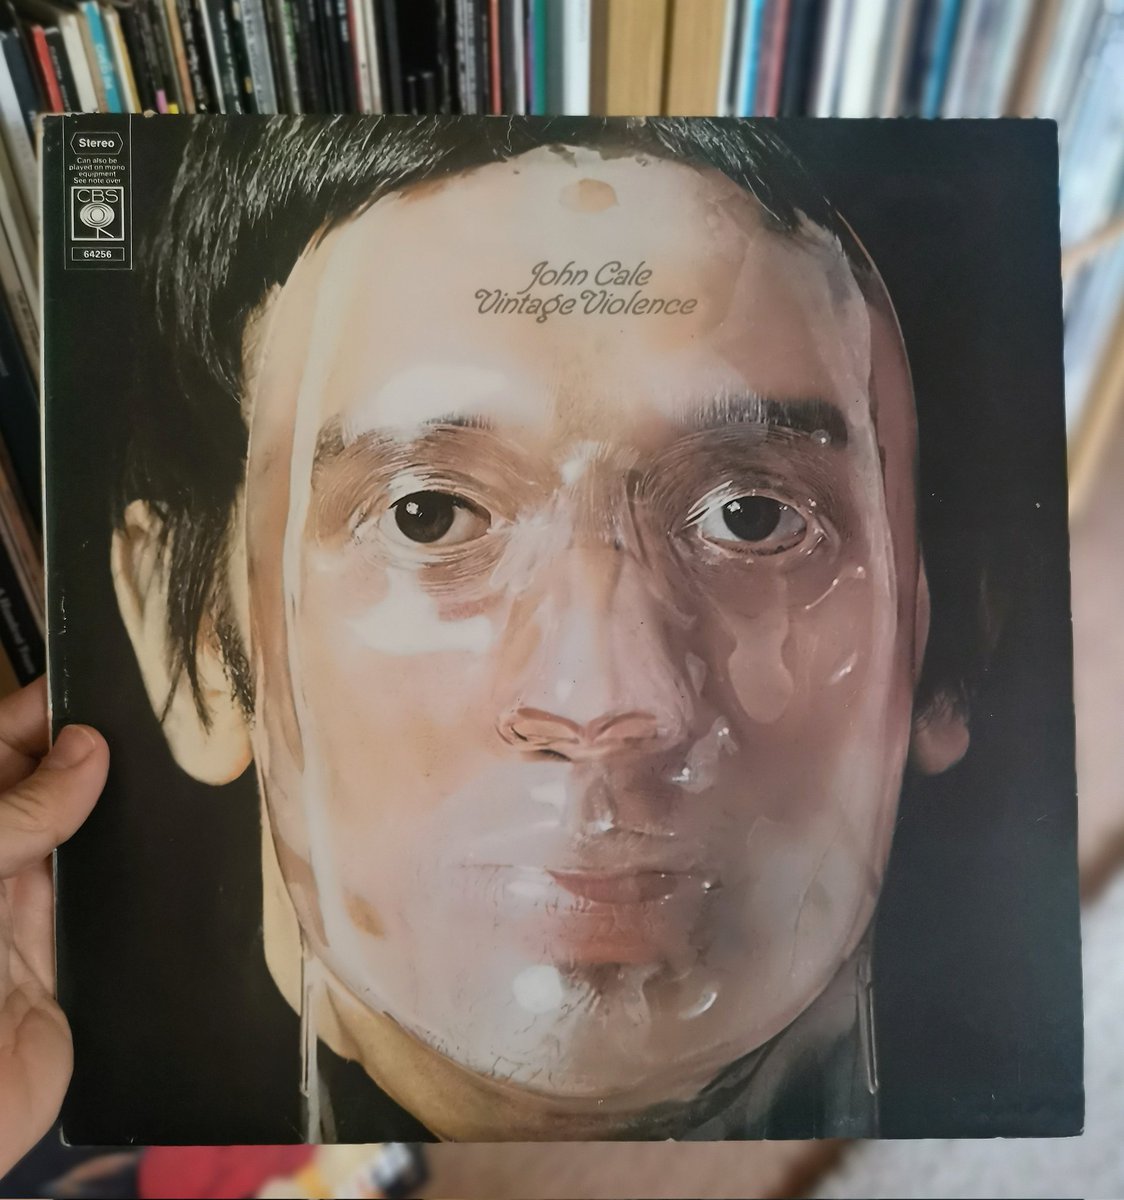 #NP Easing into the weekend with the great John Cale 🎶🍷